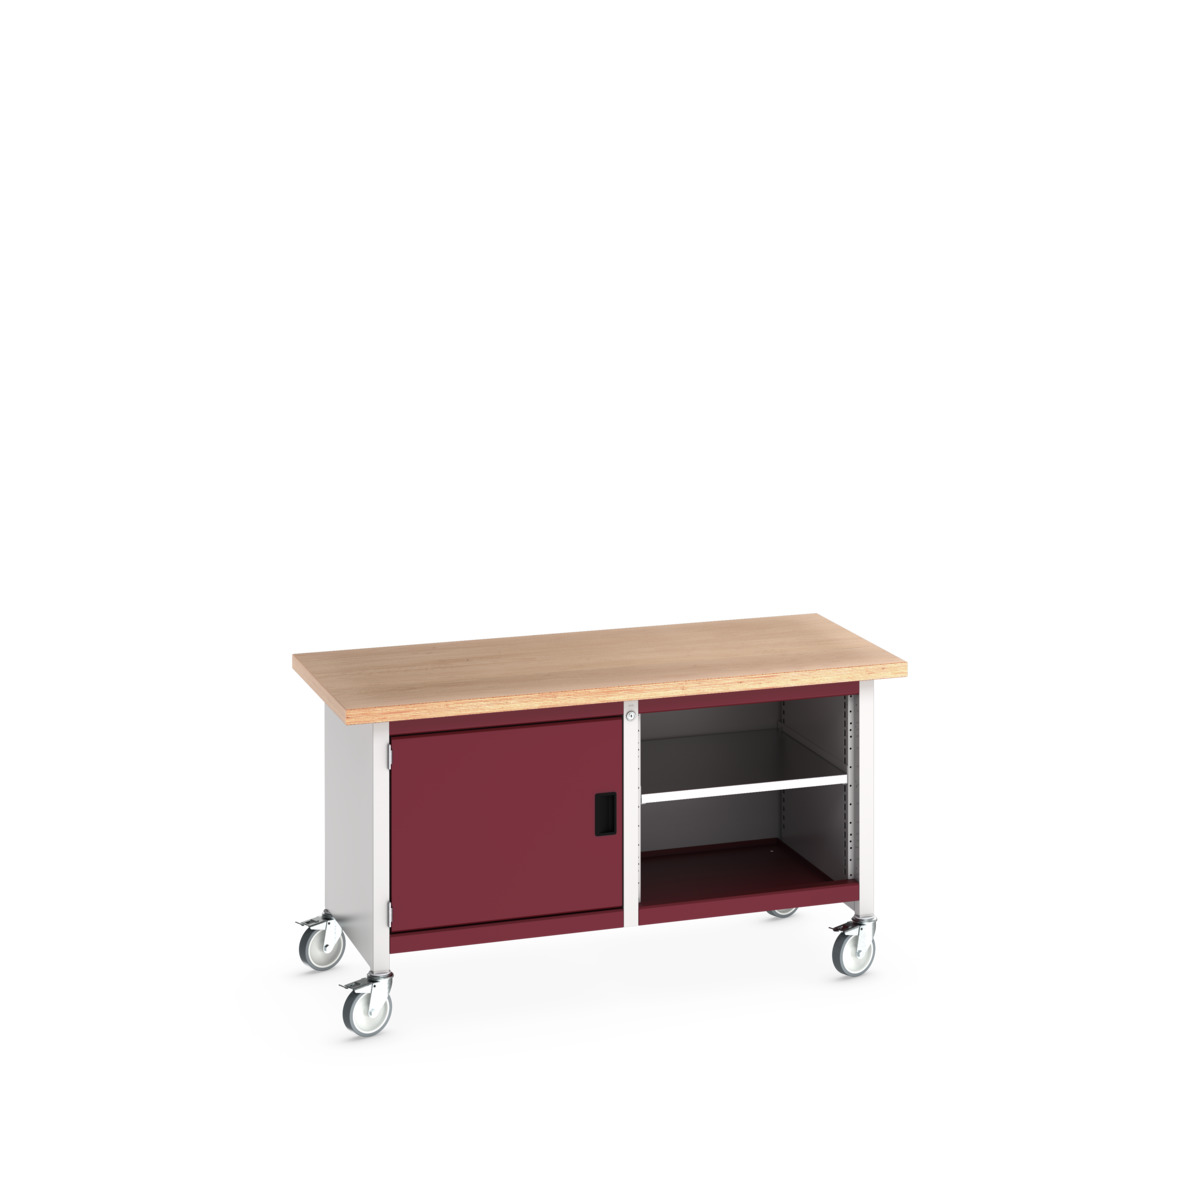 41002094.24V - cubio mobile storage bench (mpx)